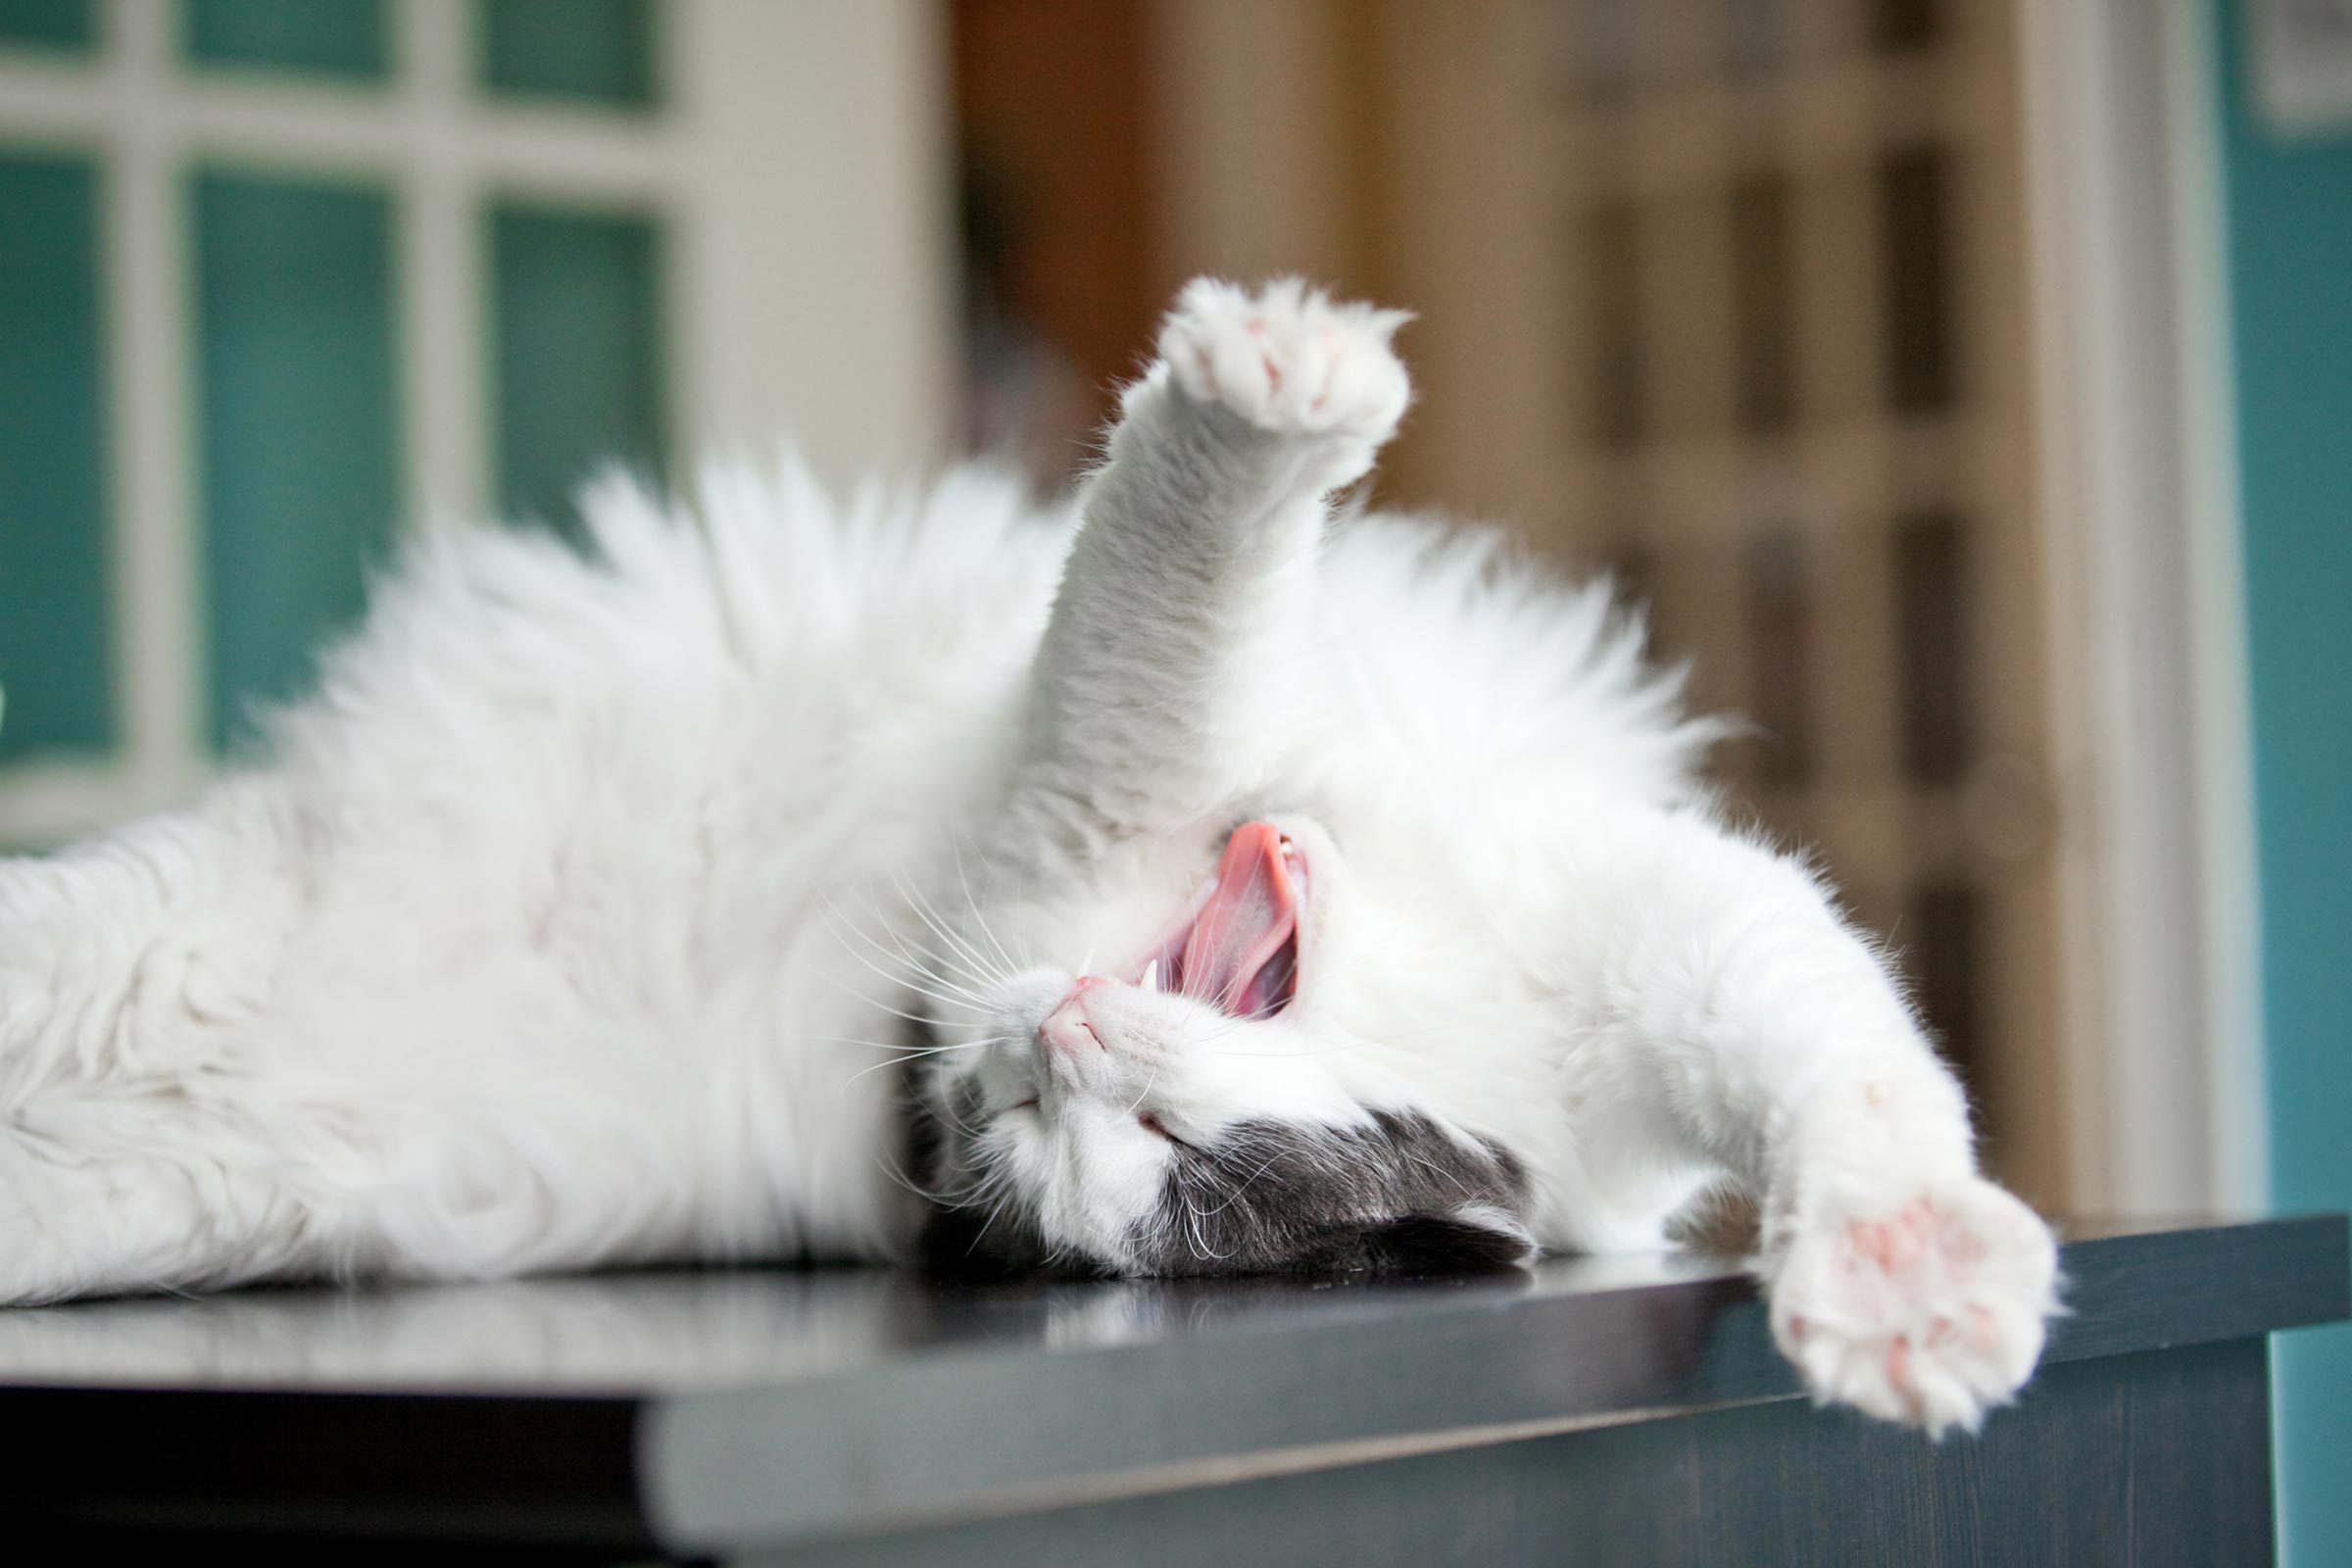 Cat Videos: Is Watching Them Good for You? | Reader's Digest